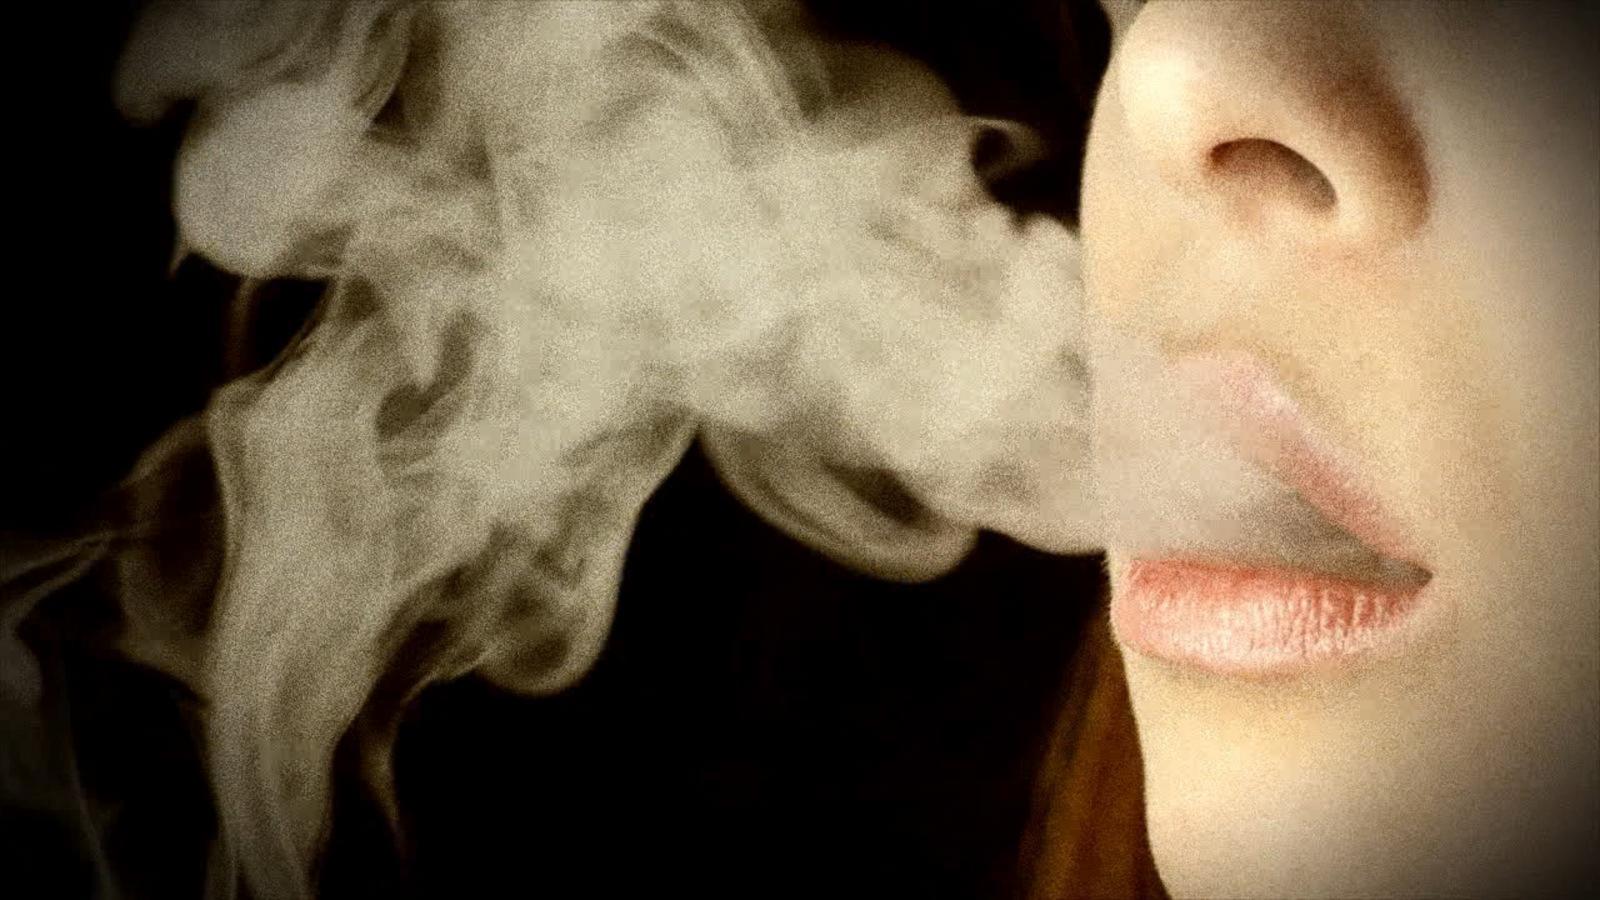 CDC report looks at middle schoolers and vaping